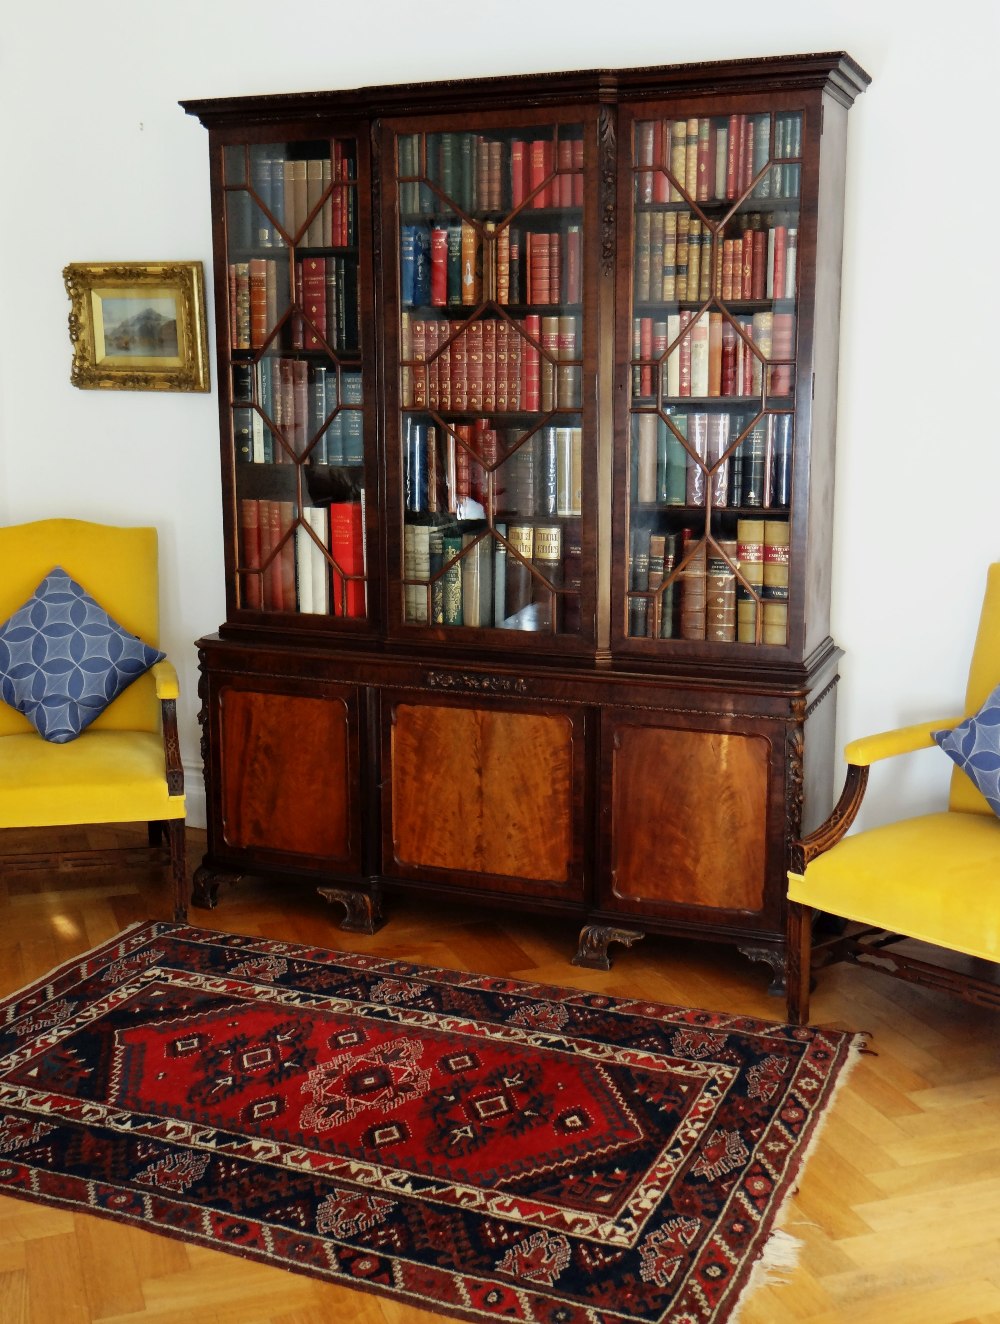 FINE WARING & GILLOW MAHOGANY BREAKFRONT BOOKCASE, foliate carved cavetto cornice above astragal - Image 8 of 8